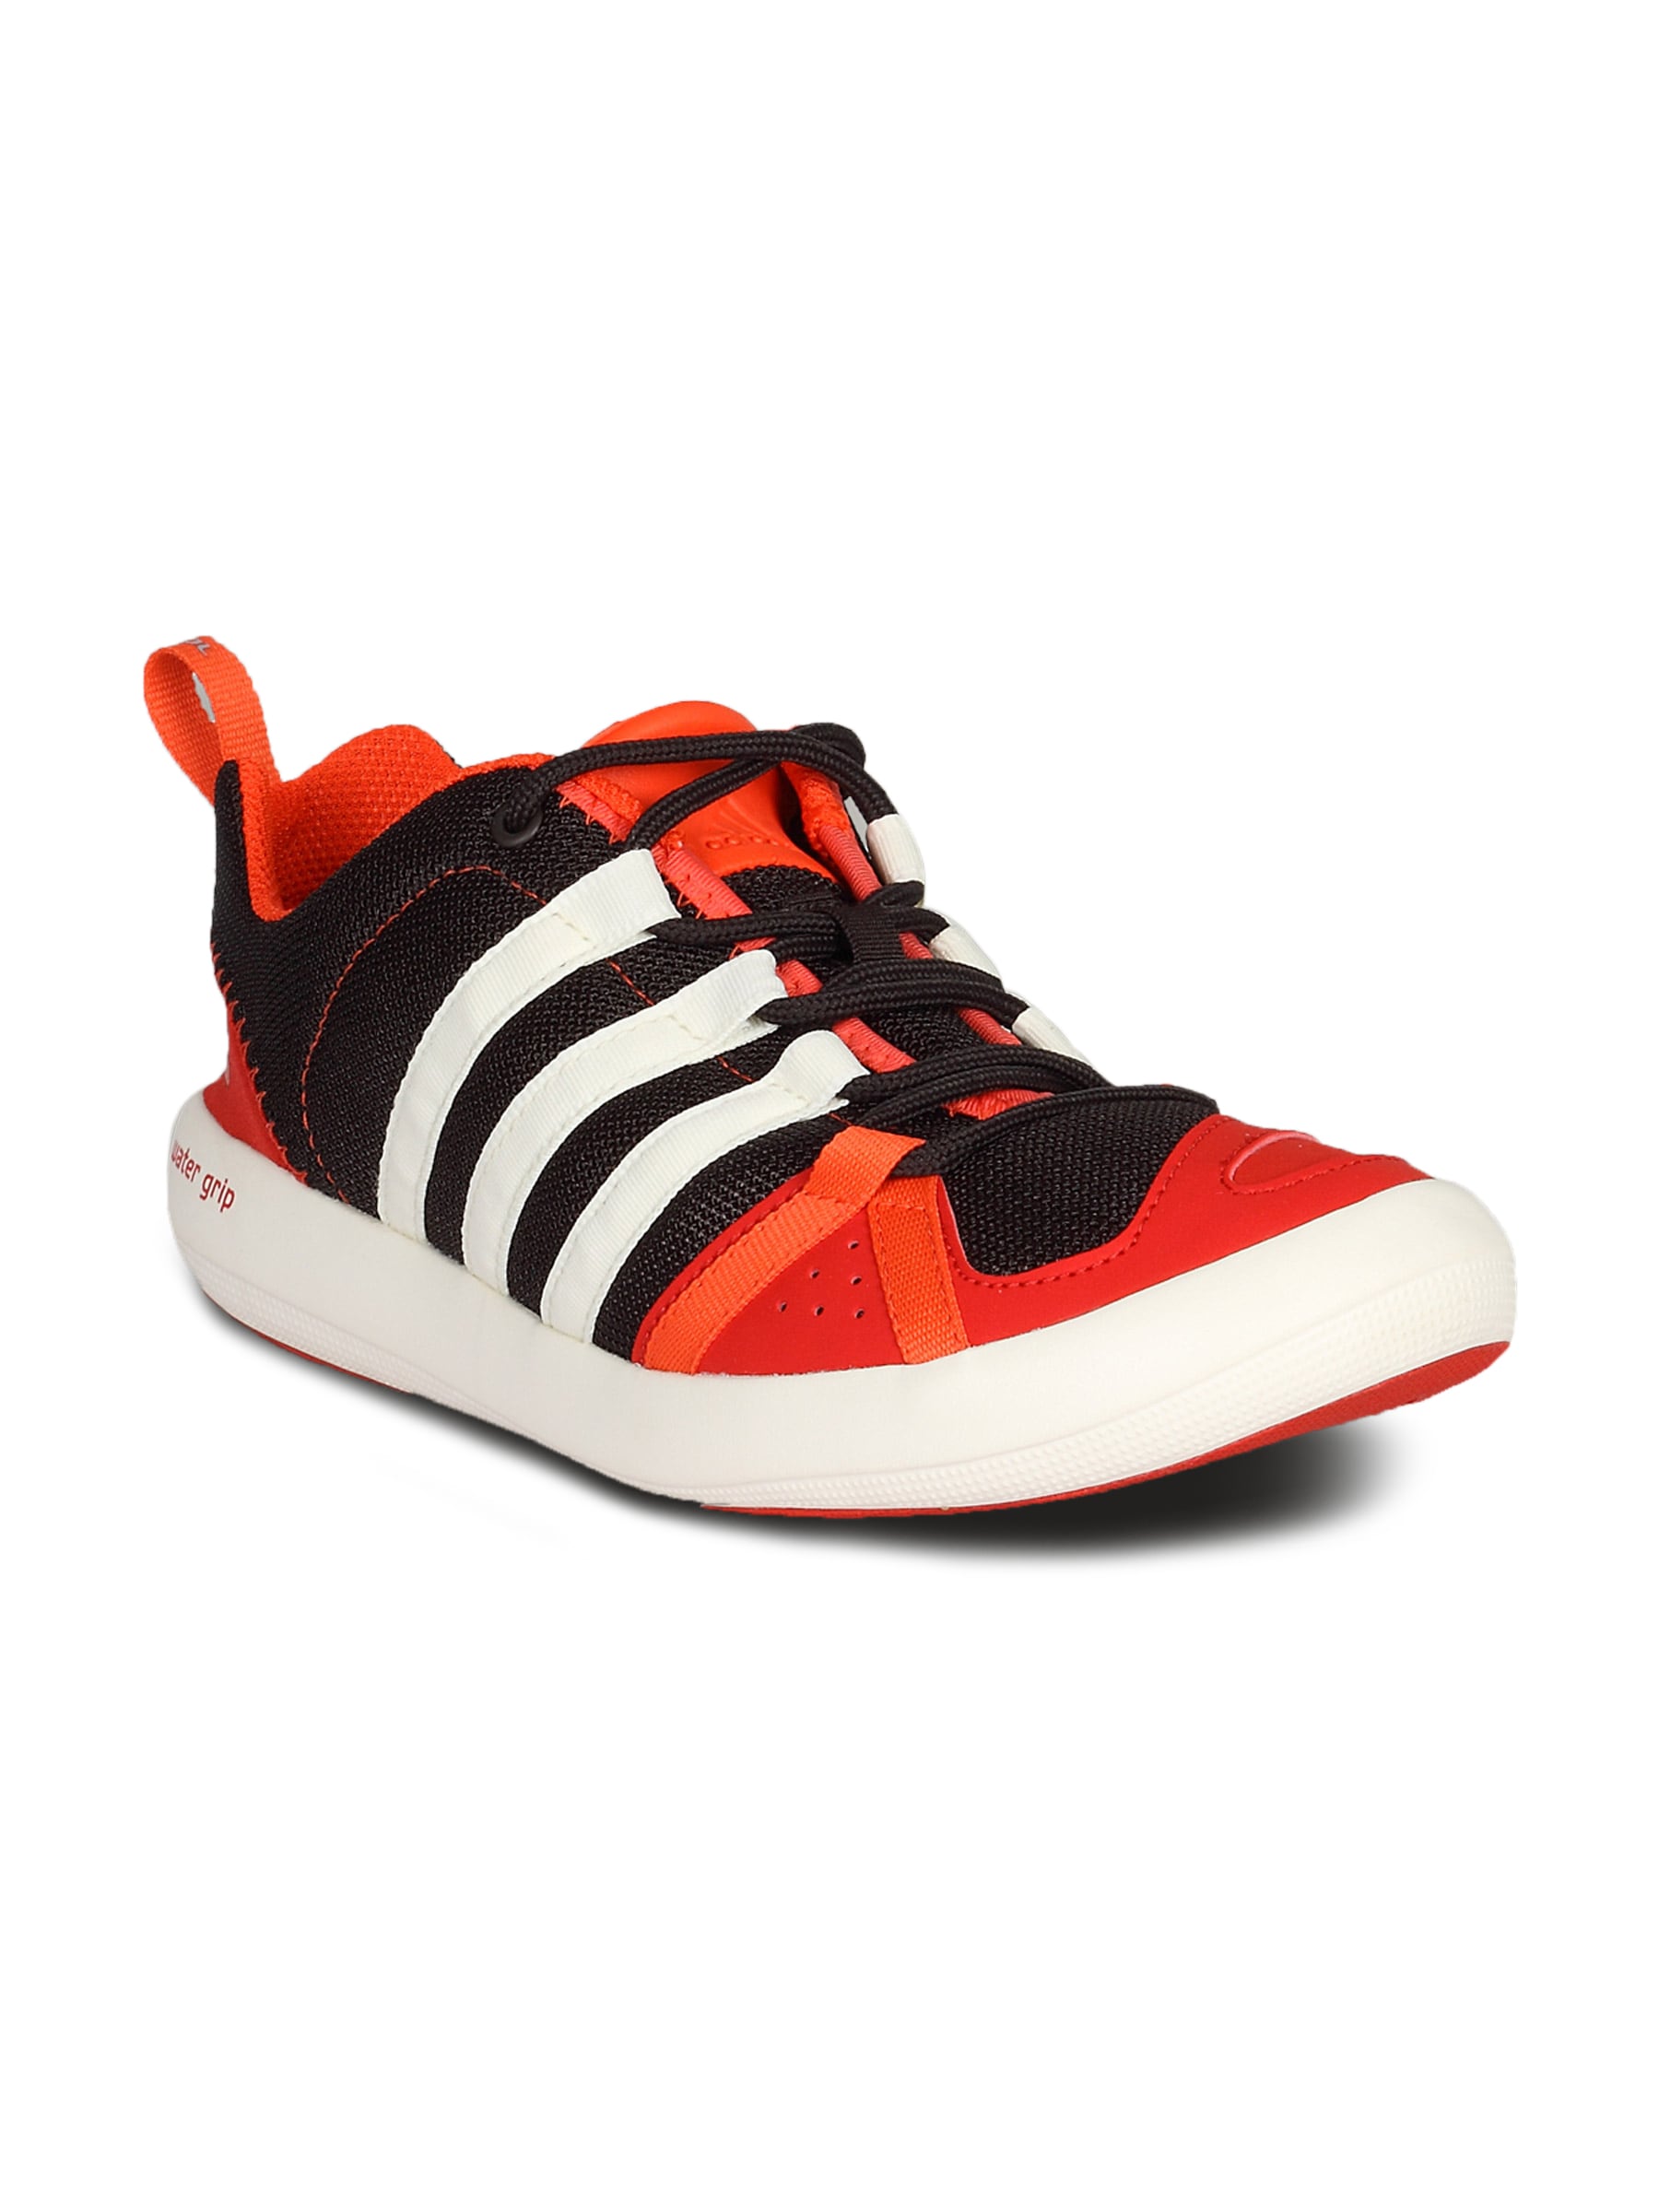 ADIDAS Men's Boat Lace Low Red Black Brown Shoe